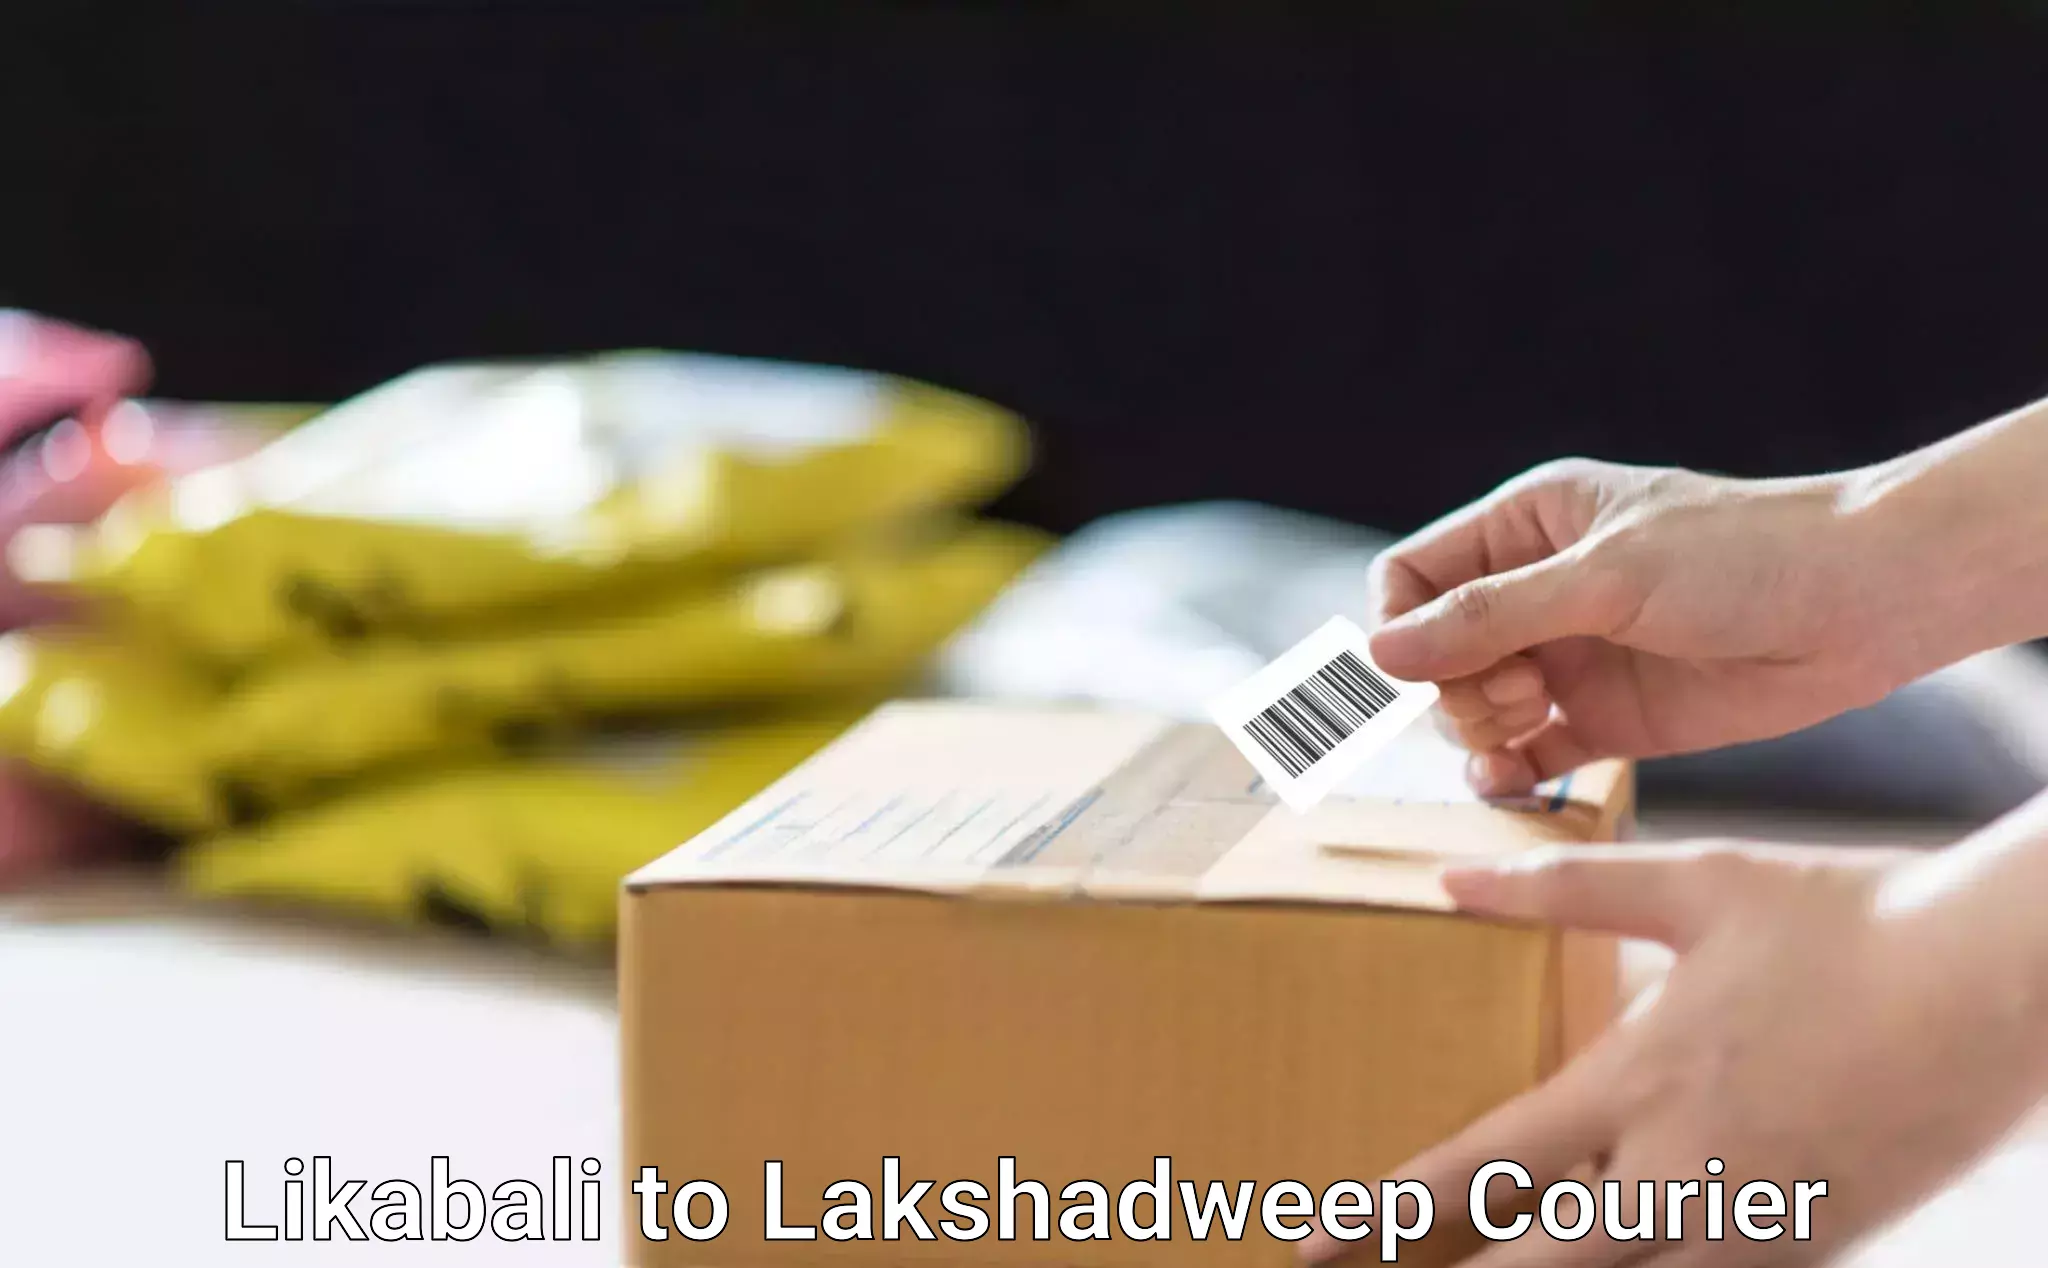 Online courier booking Likabali to Lakshadweep